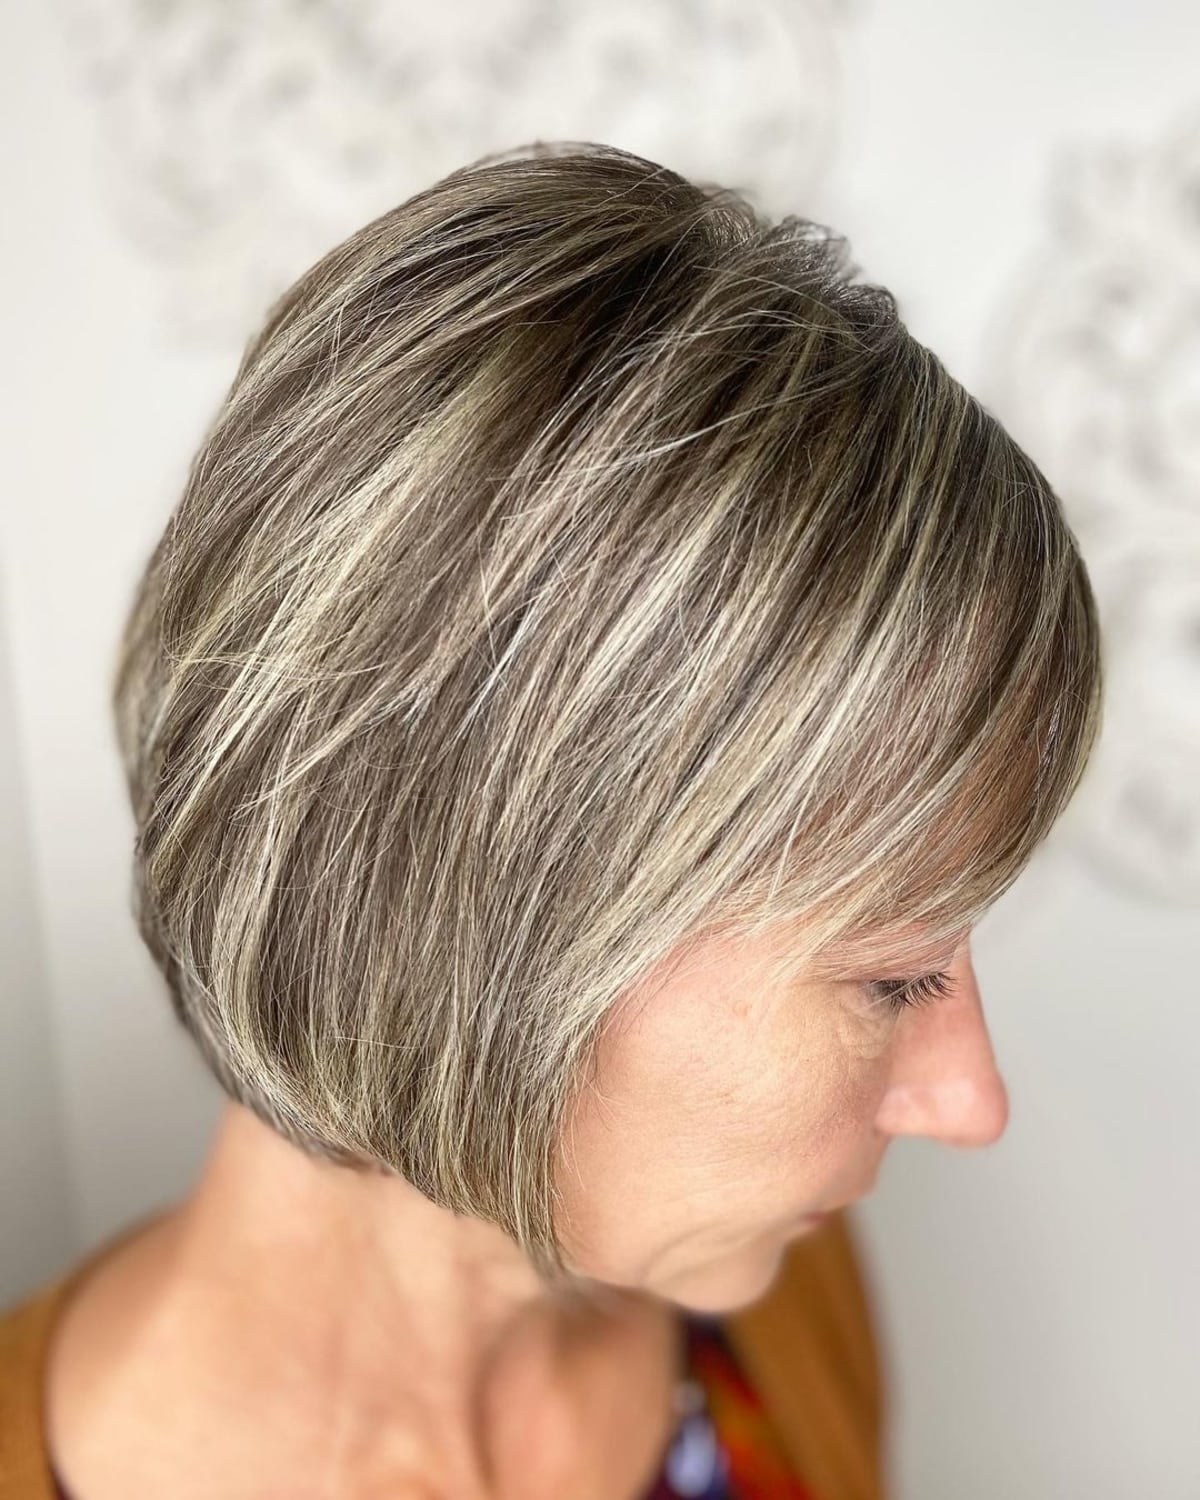 Icy mocha brown hair for women over 50